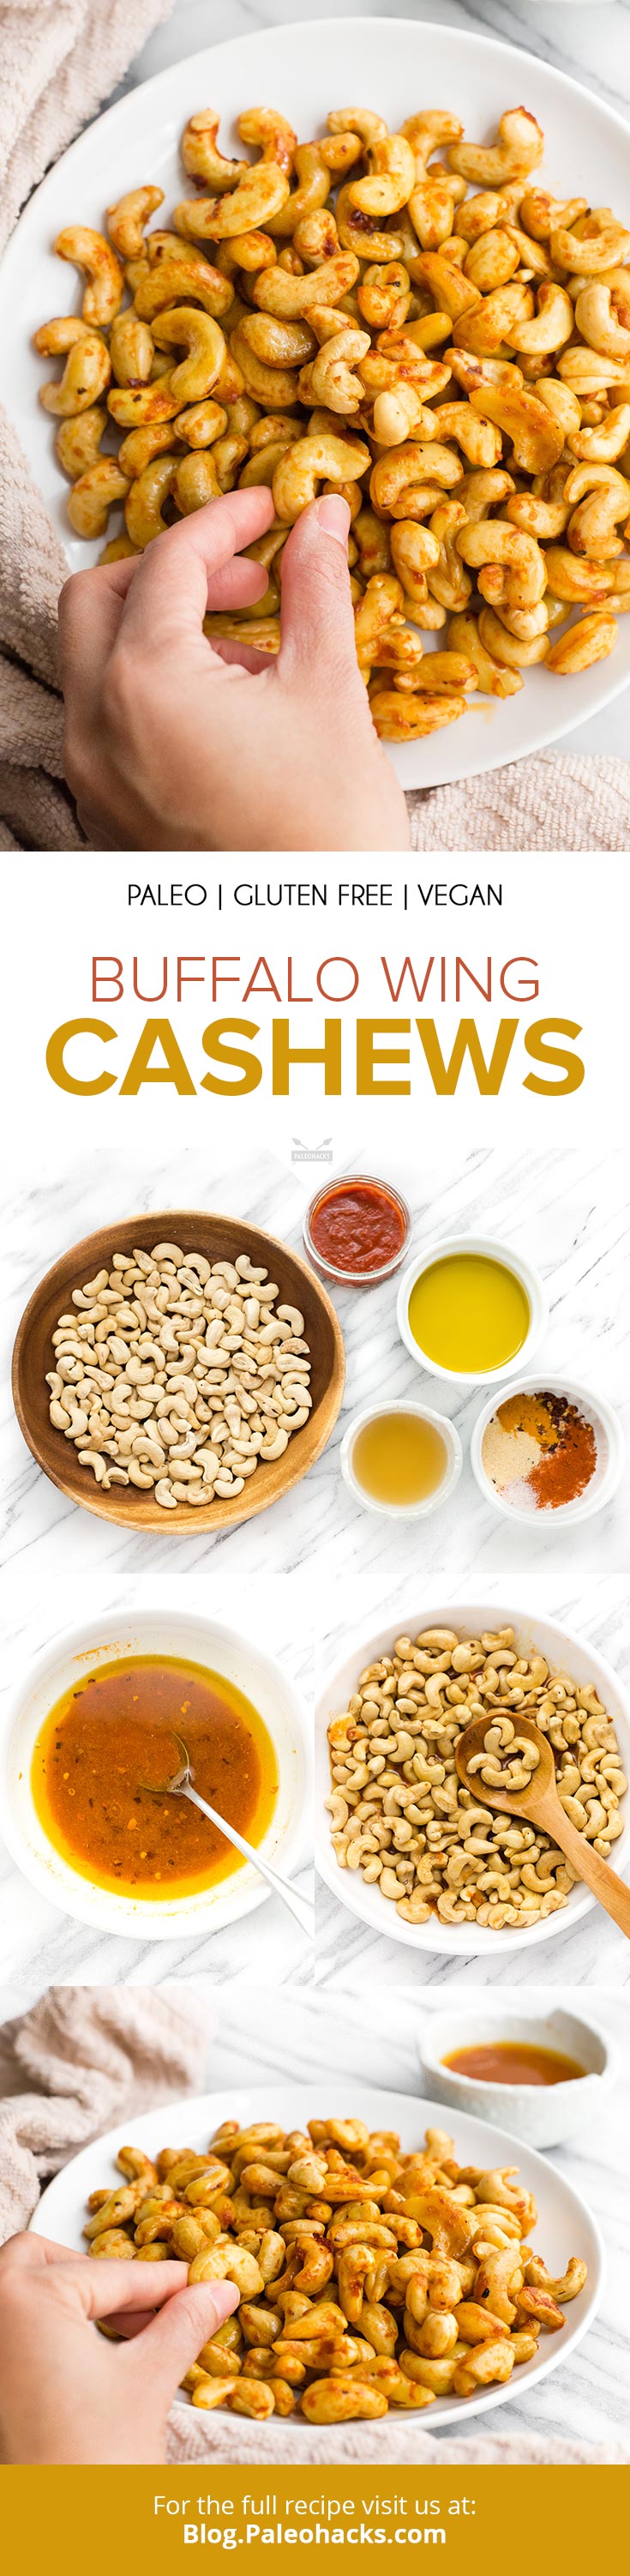 When you need something to munch on between meals, reach for these addictive cashews infused with buffalo wing flavor. Can't stop snacking!